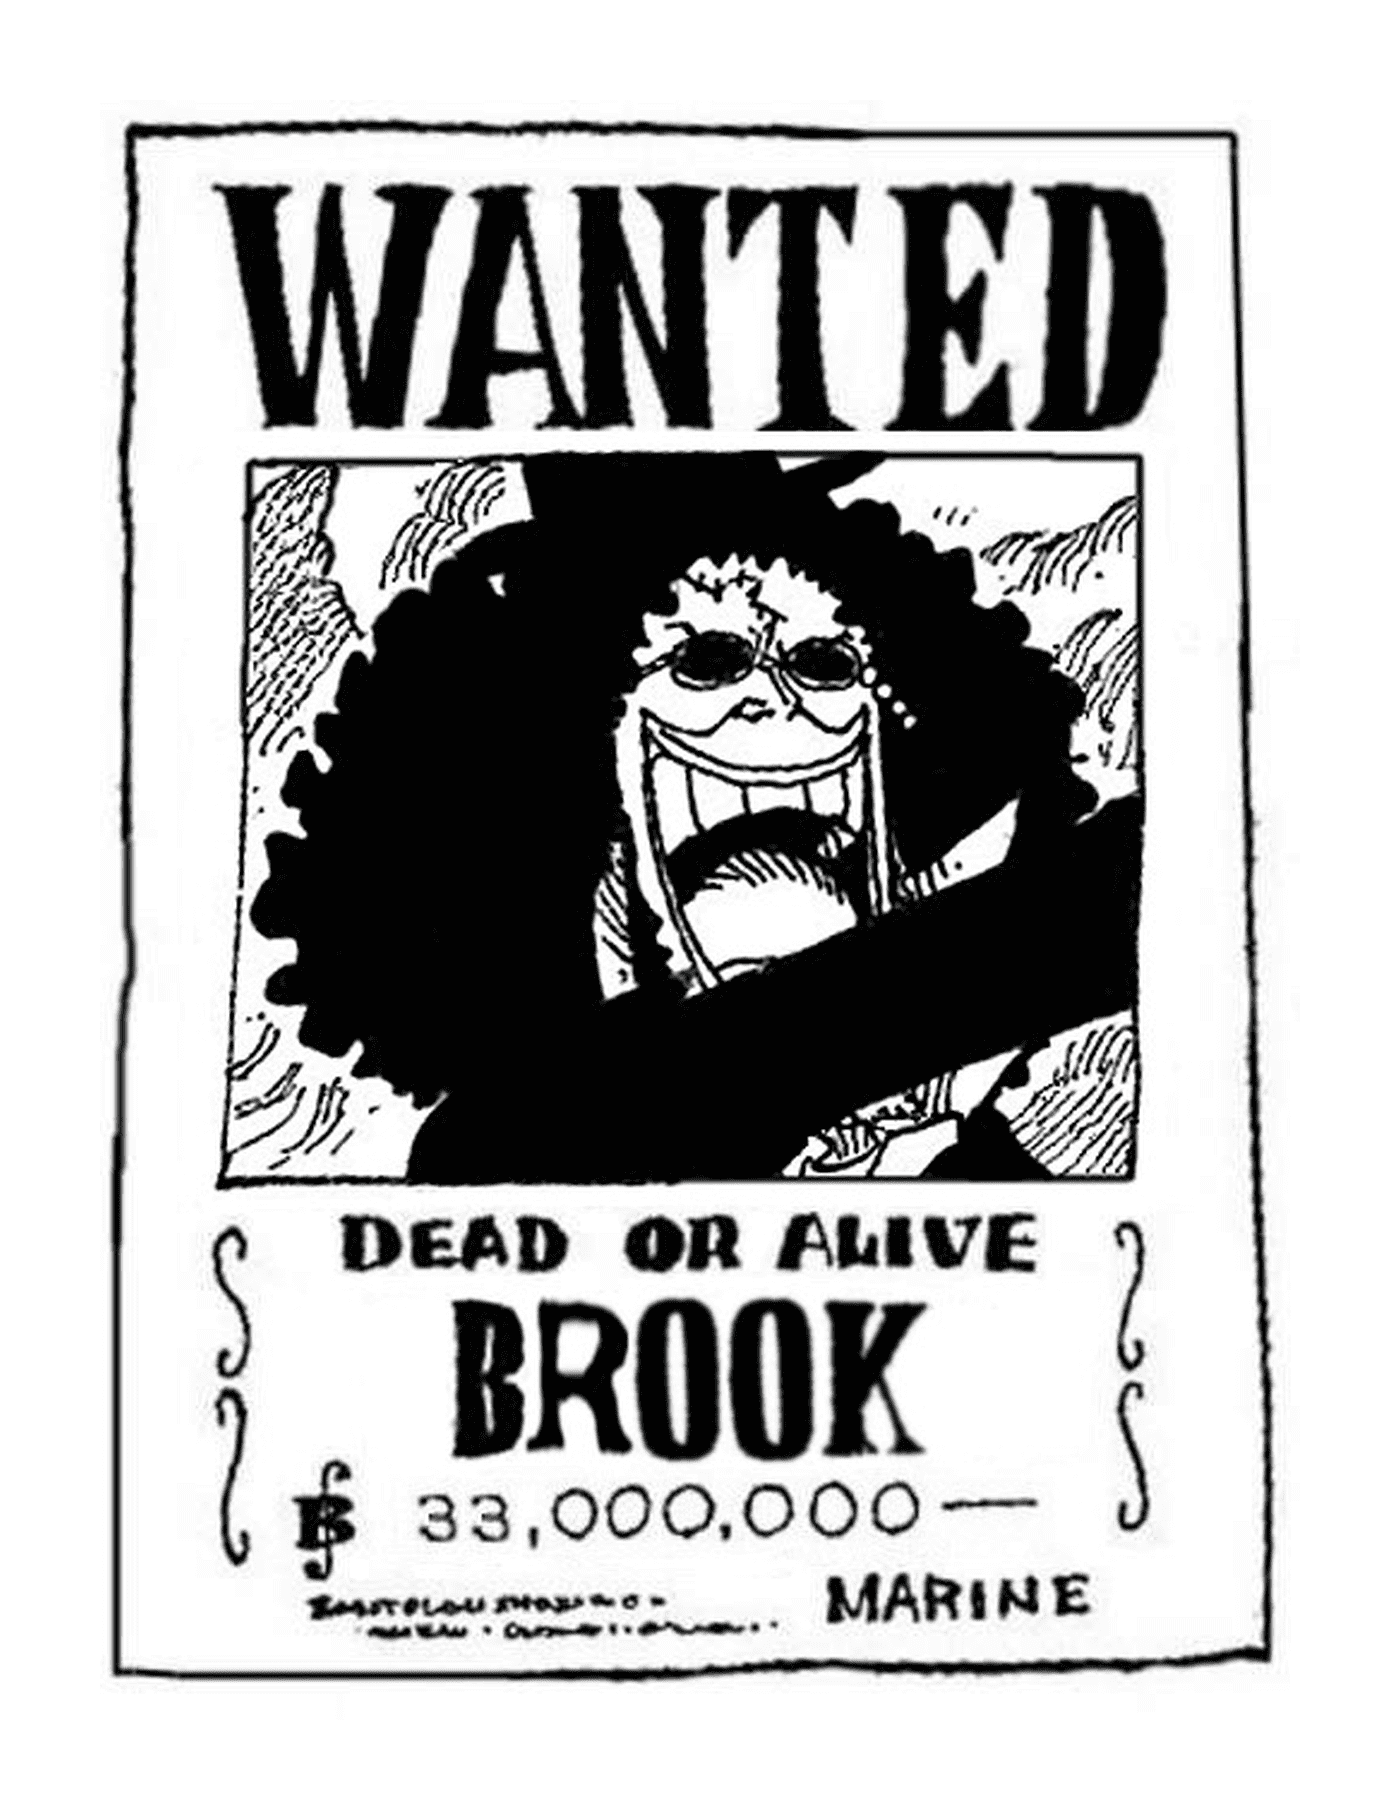  Wanted Brook, dead or alive 